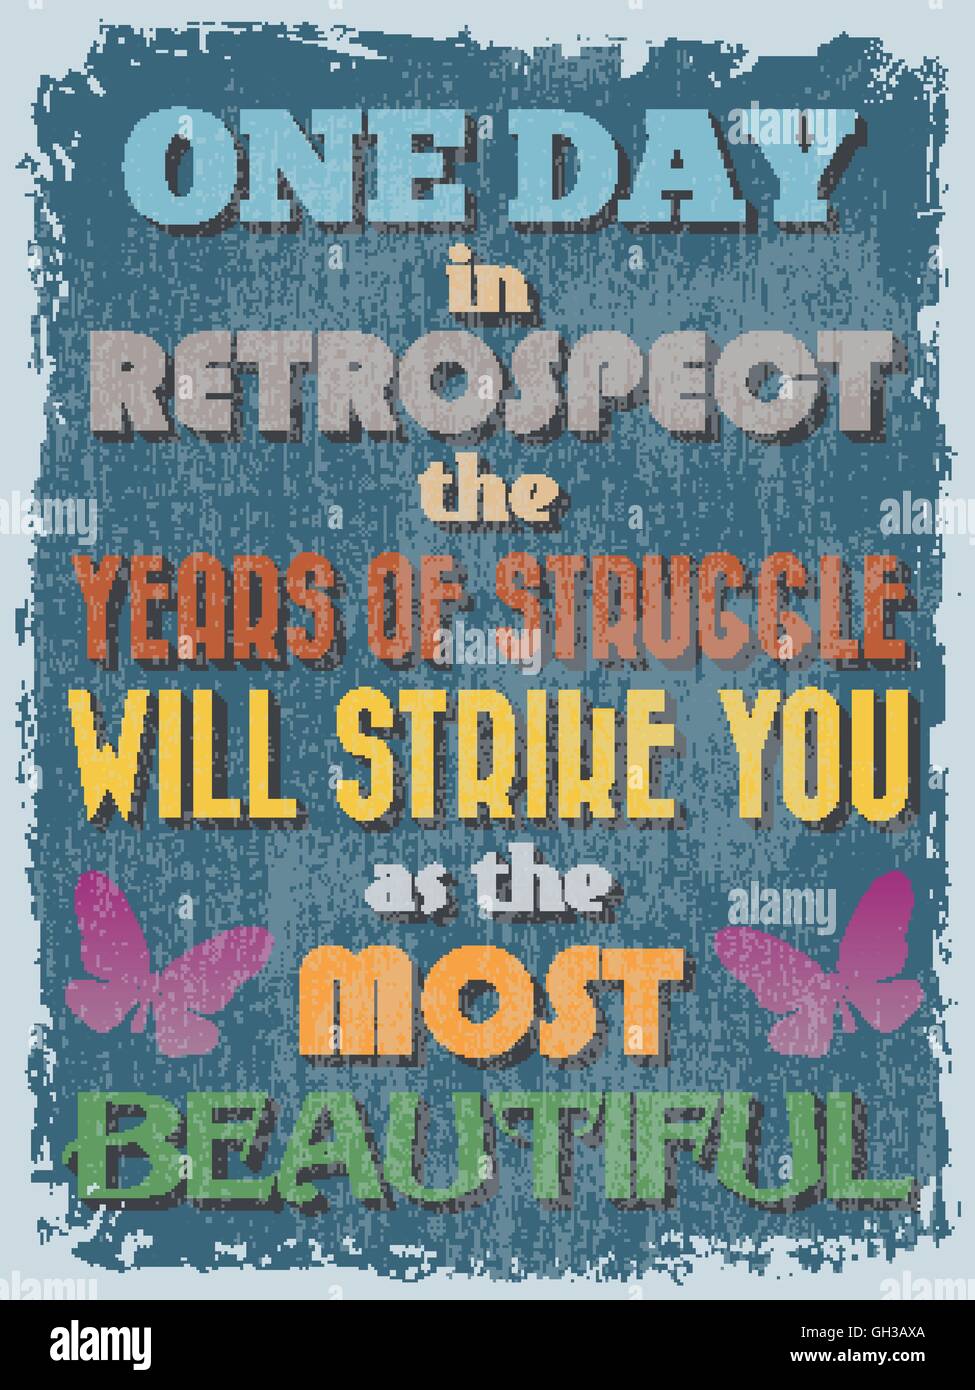 Retro Vintage Motivational Quote Poster. One Day in Retrospect The Years of Struggle Will Strike You as The Most Beautiful. Grun Stock Vector